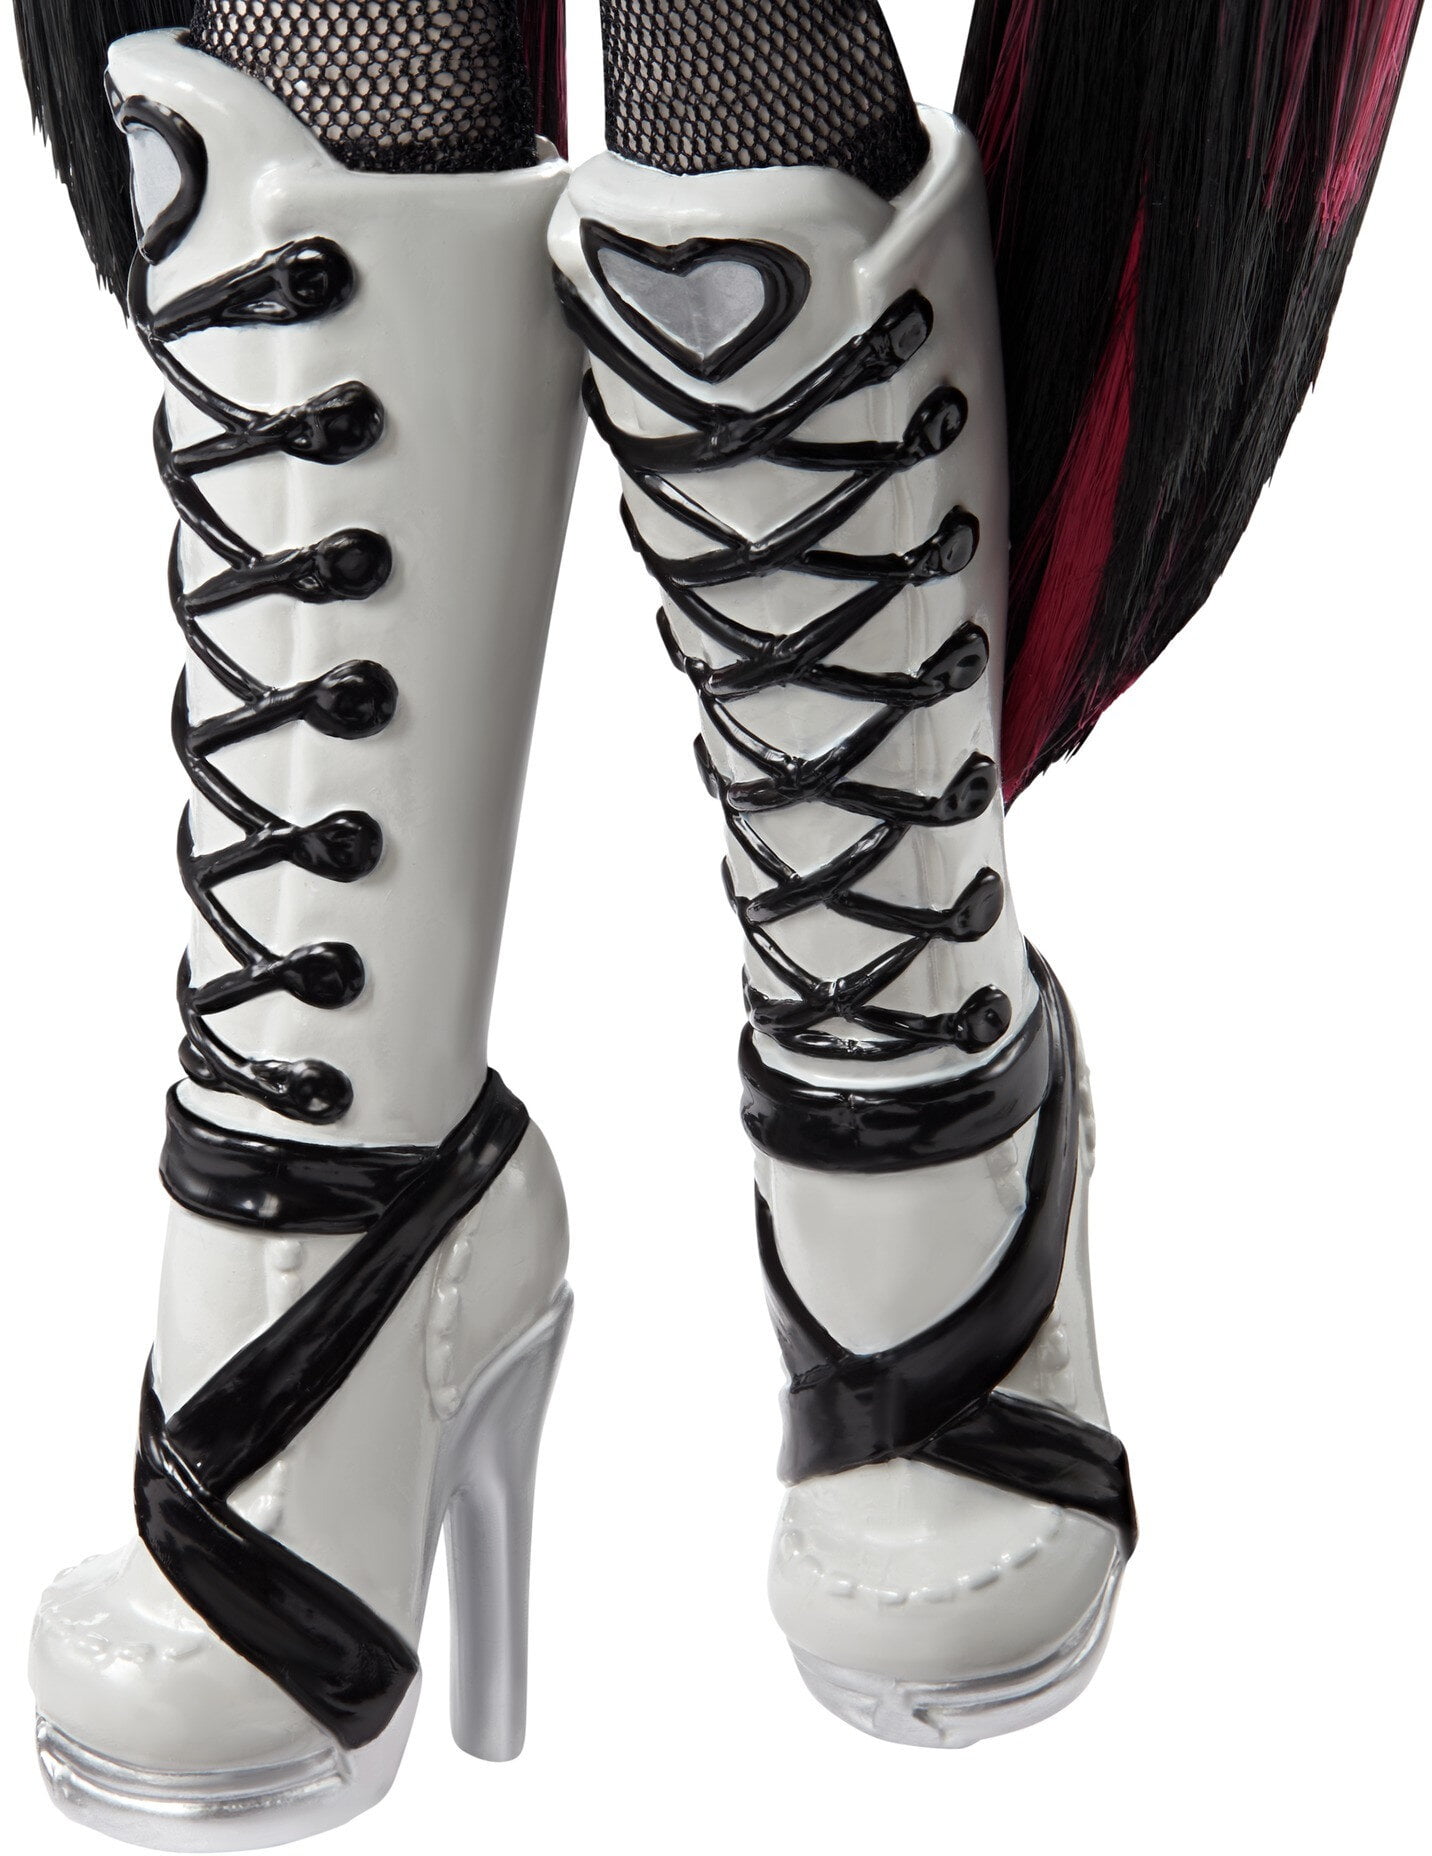 Draculaura, Monster High Doll Collector Doll in Black and White, Reel Drama